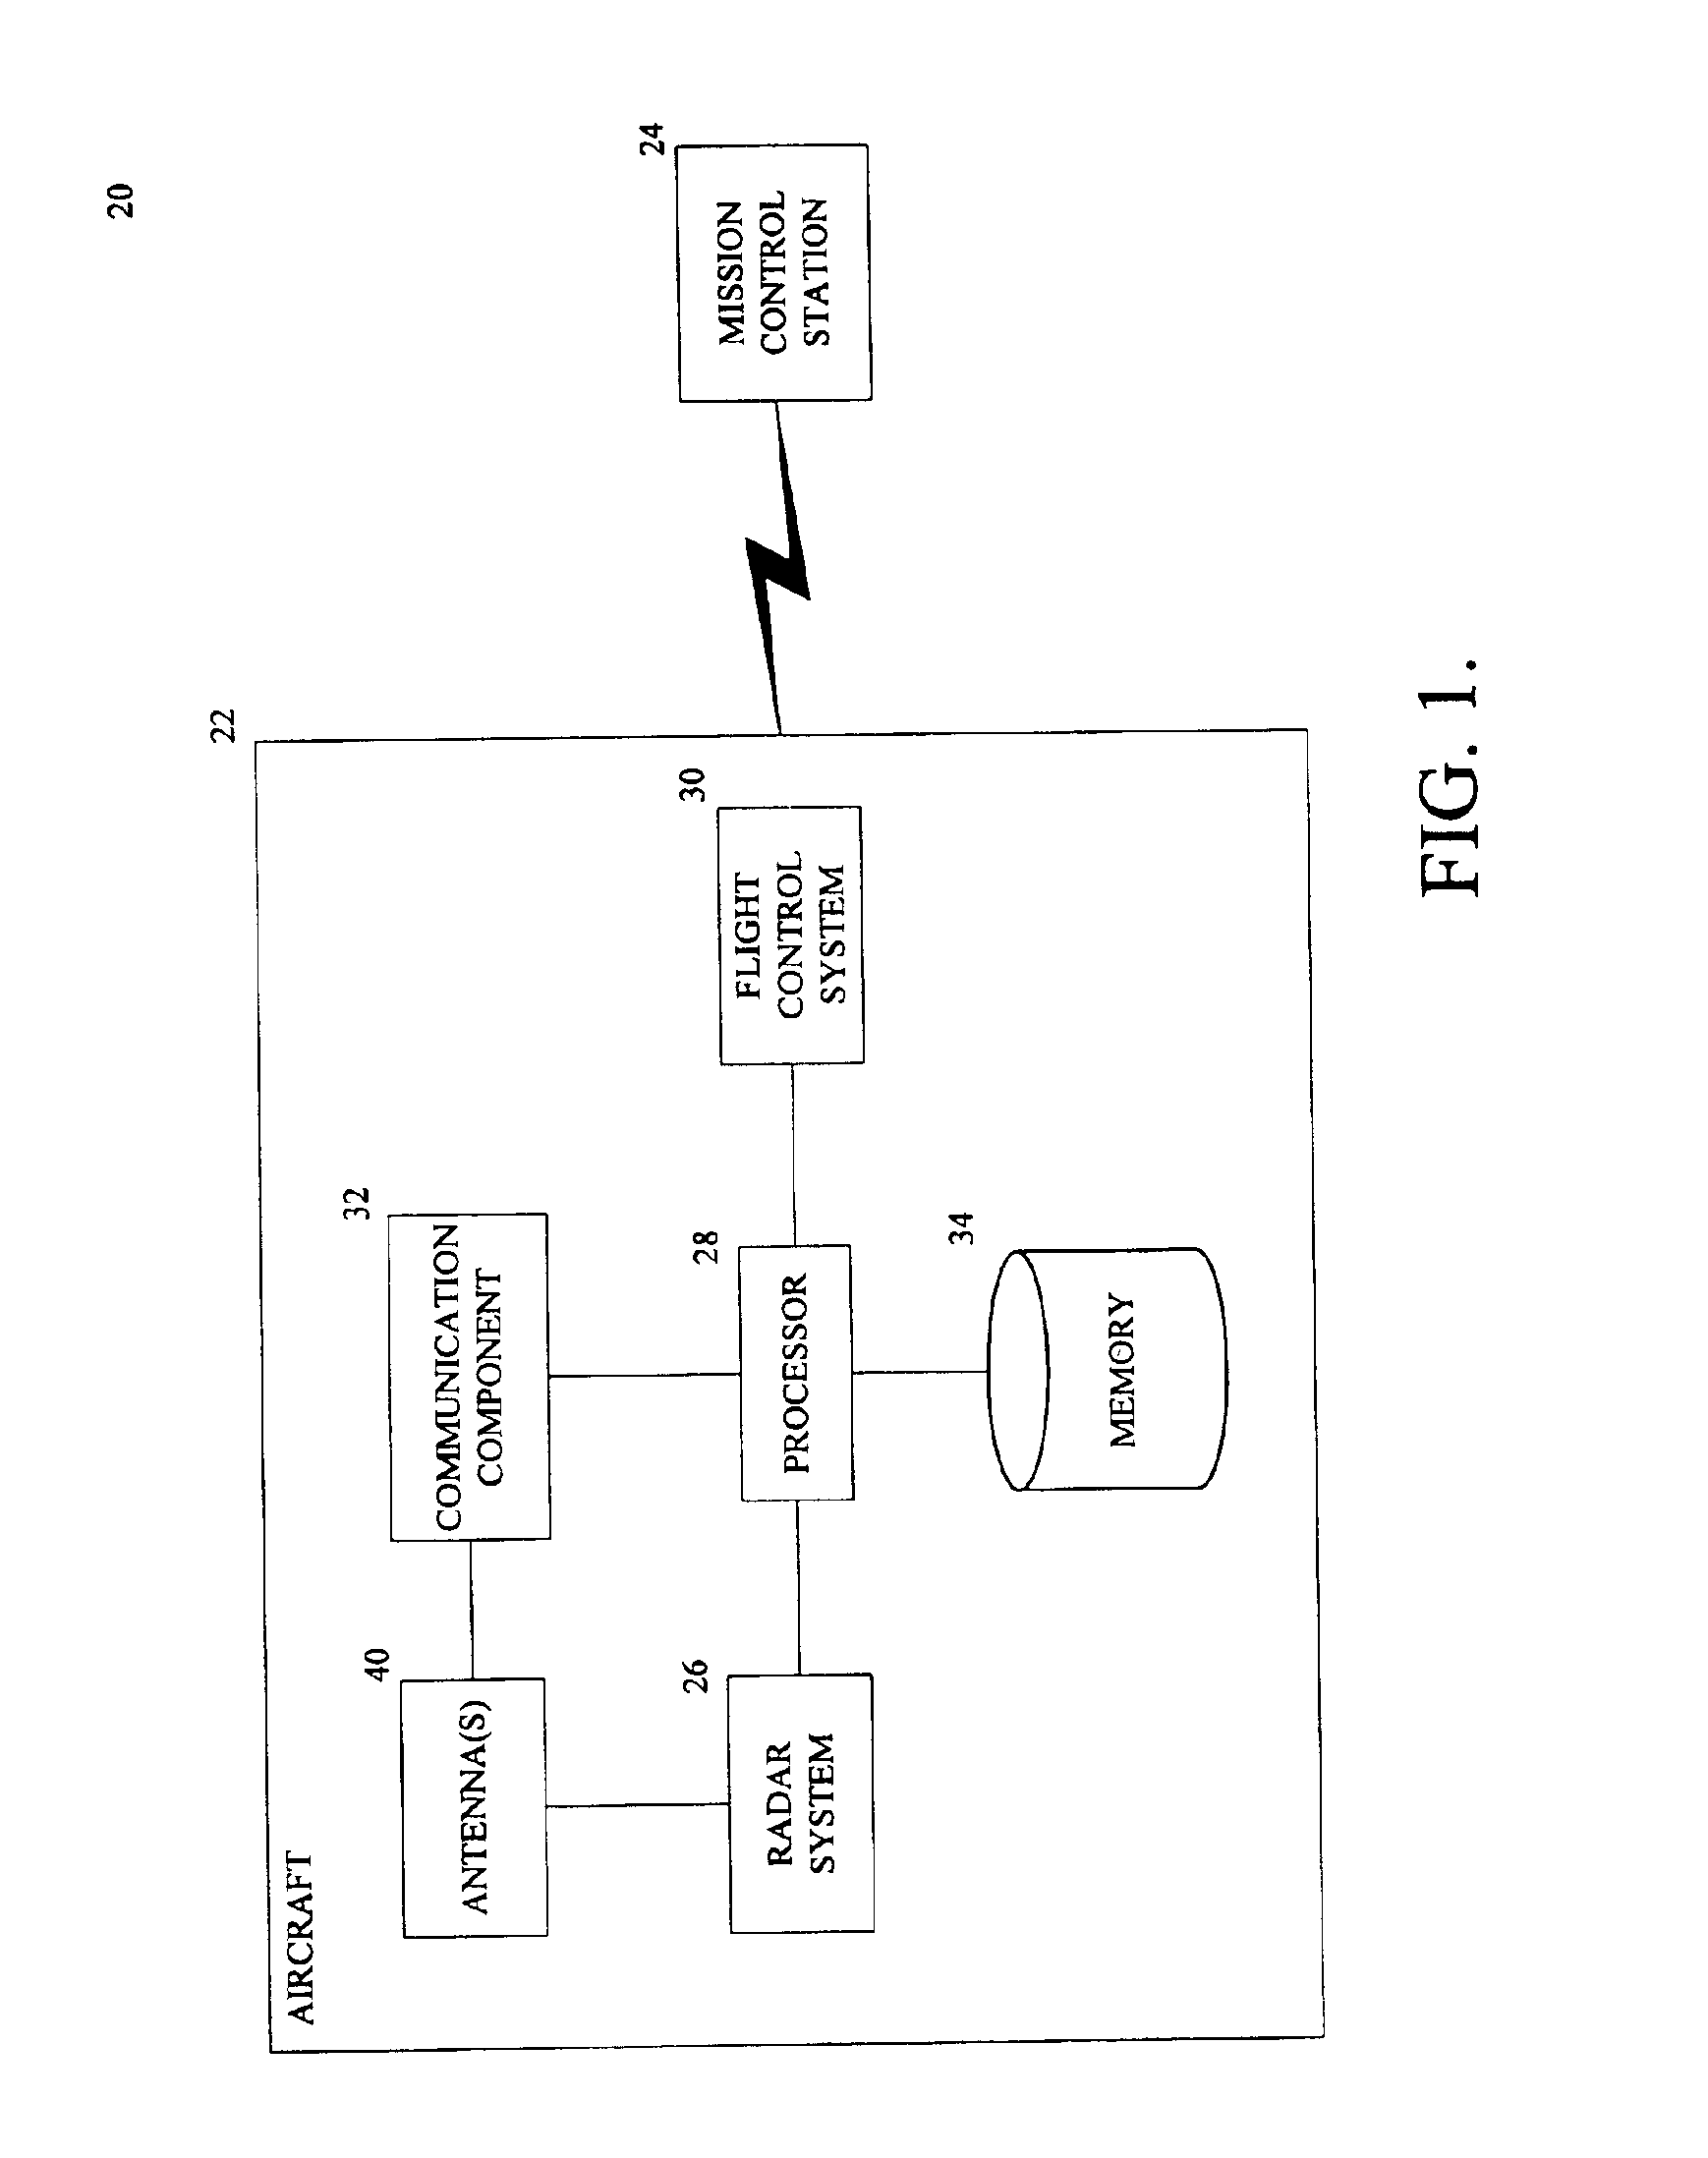 System and method for target tracking and navigation to a target